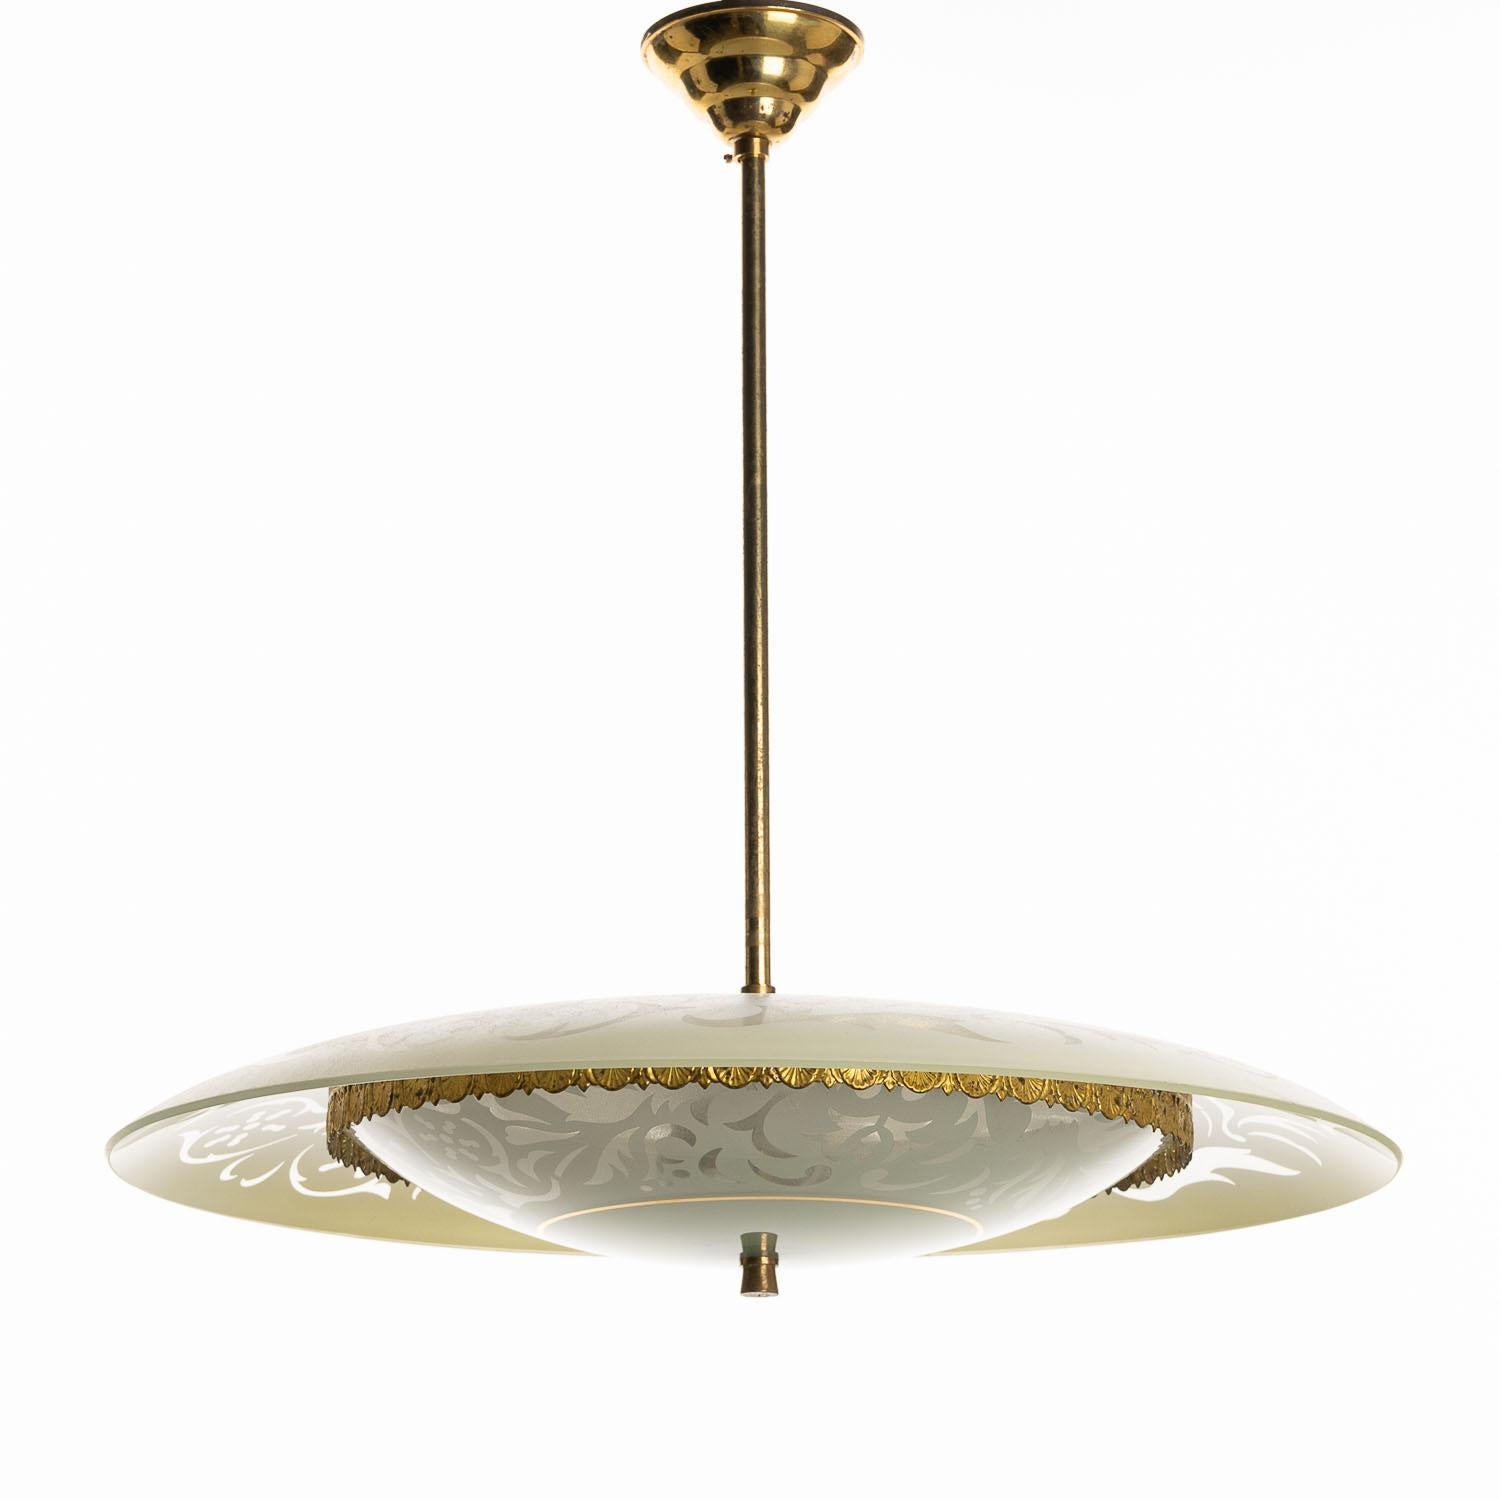 With a nod to the style of Pietro Chiesa, this mid-century brass and glass pendant lighting is a great way to illuminate your space with style. The patterned glass plate sits atop the decorative brass-edged plate underneath, resulting in a stunning